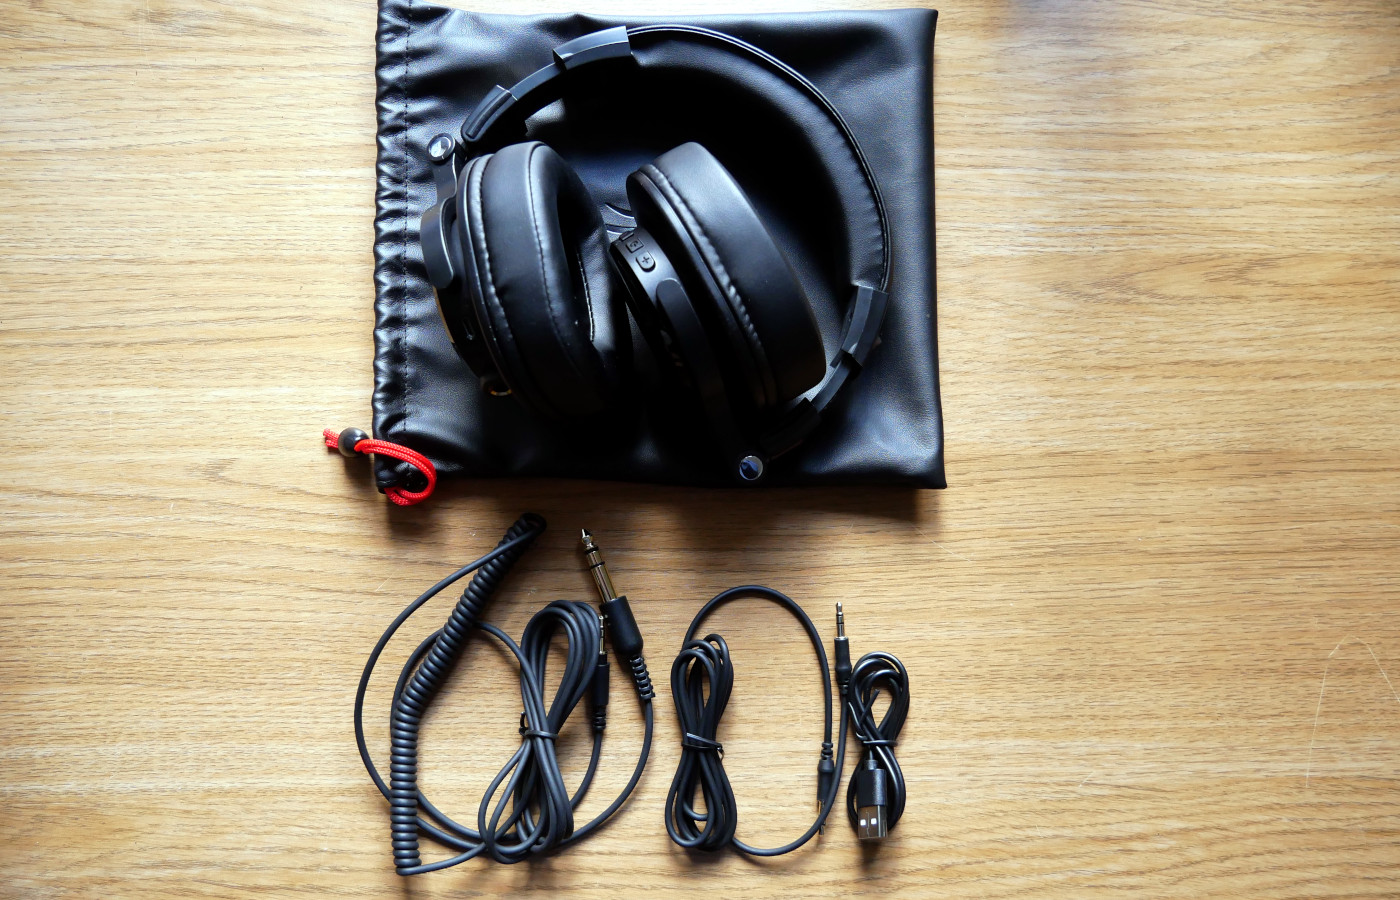 OneOdio A70 Wireless Headphones (for DJs) Review – MBReviews